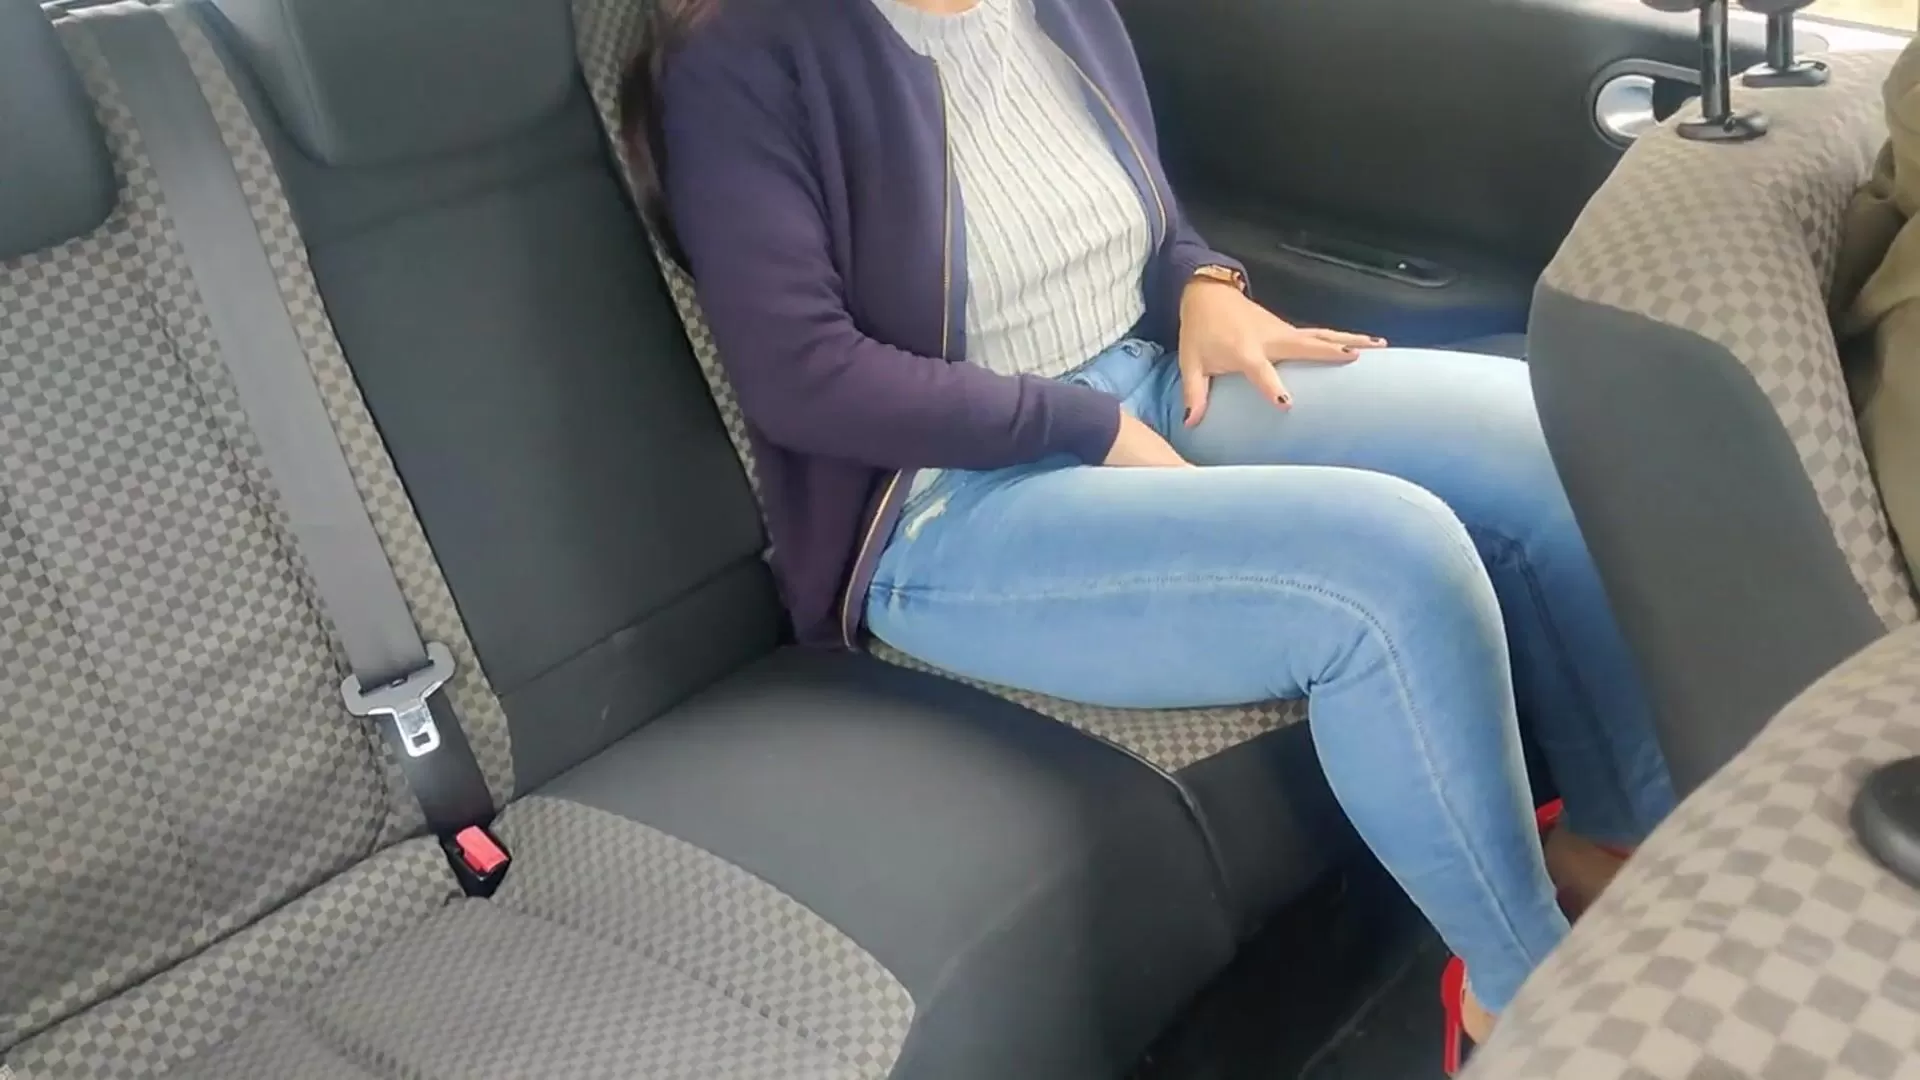 Busy worker in red heels masturbates her pussy and ass in a car taxi/uber watch online image